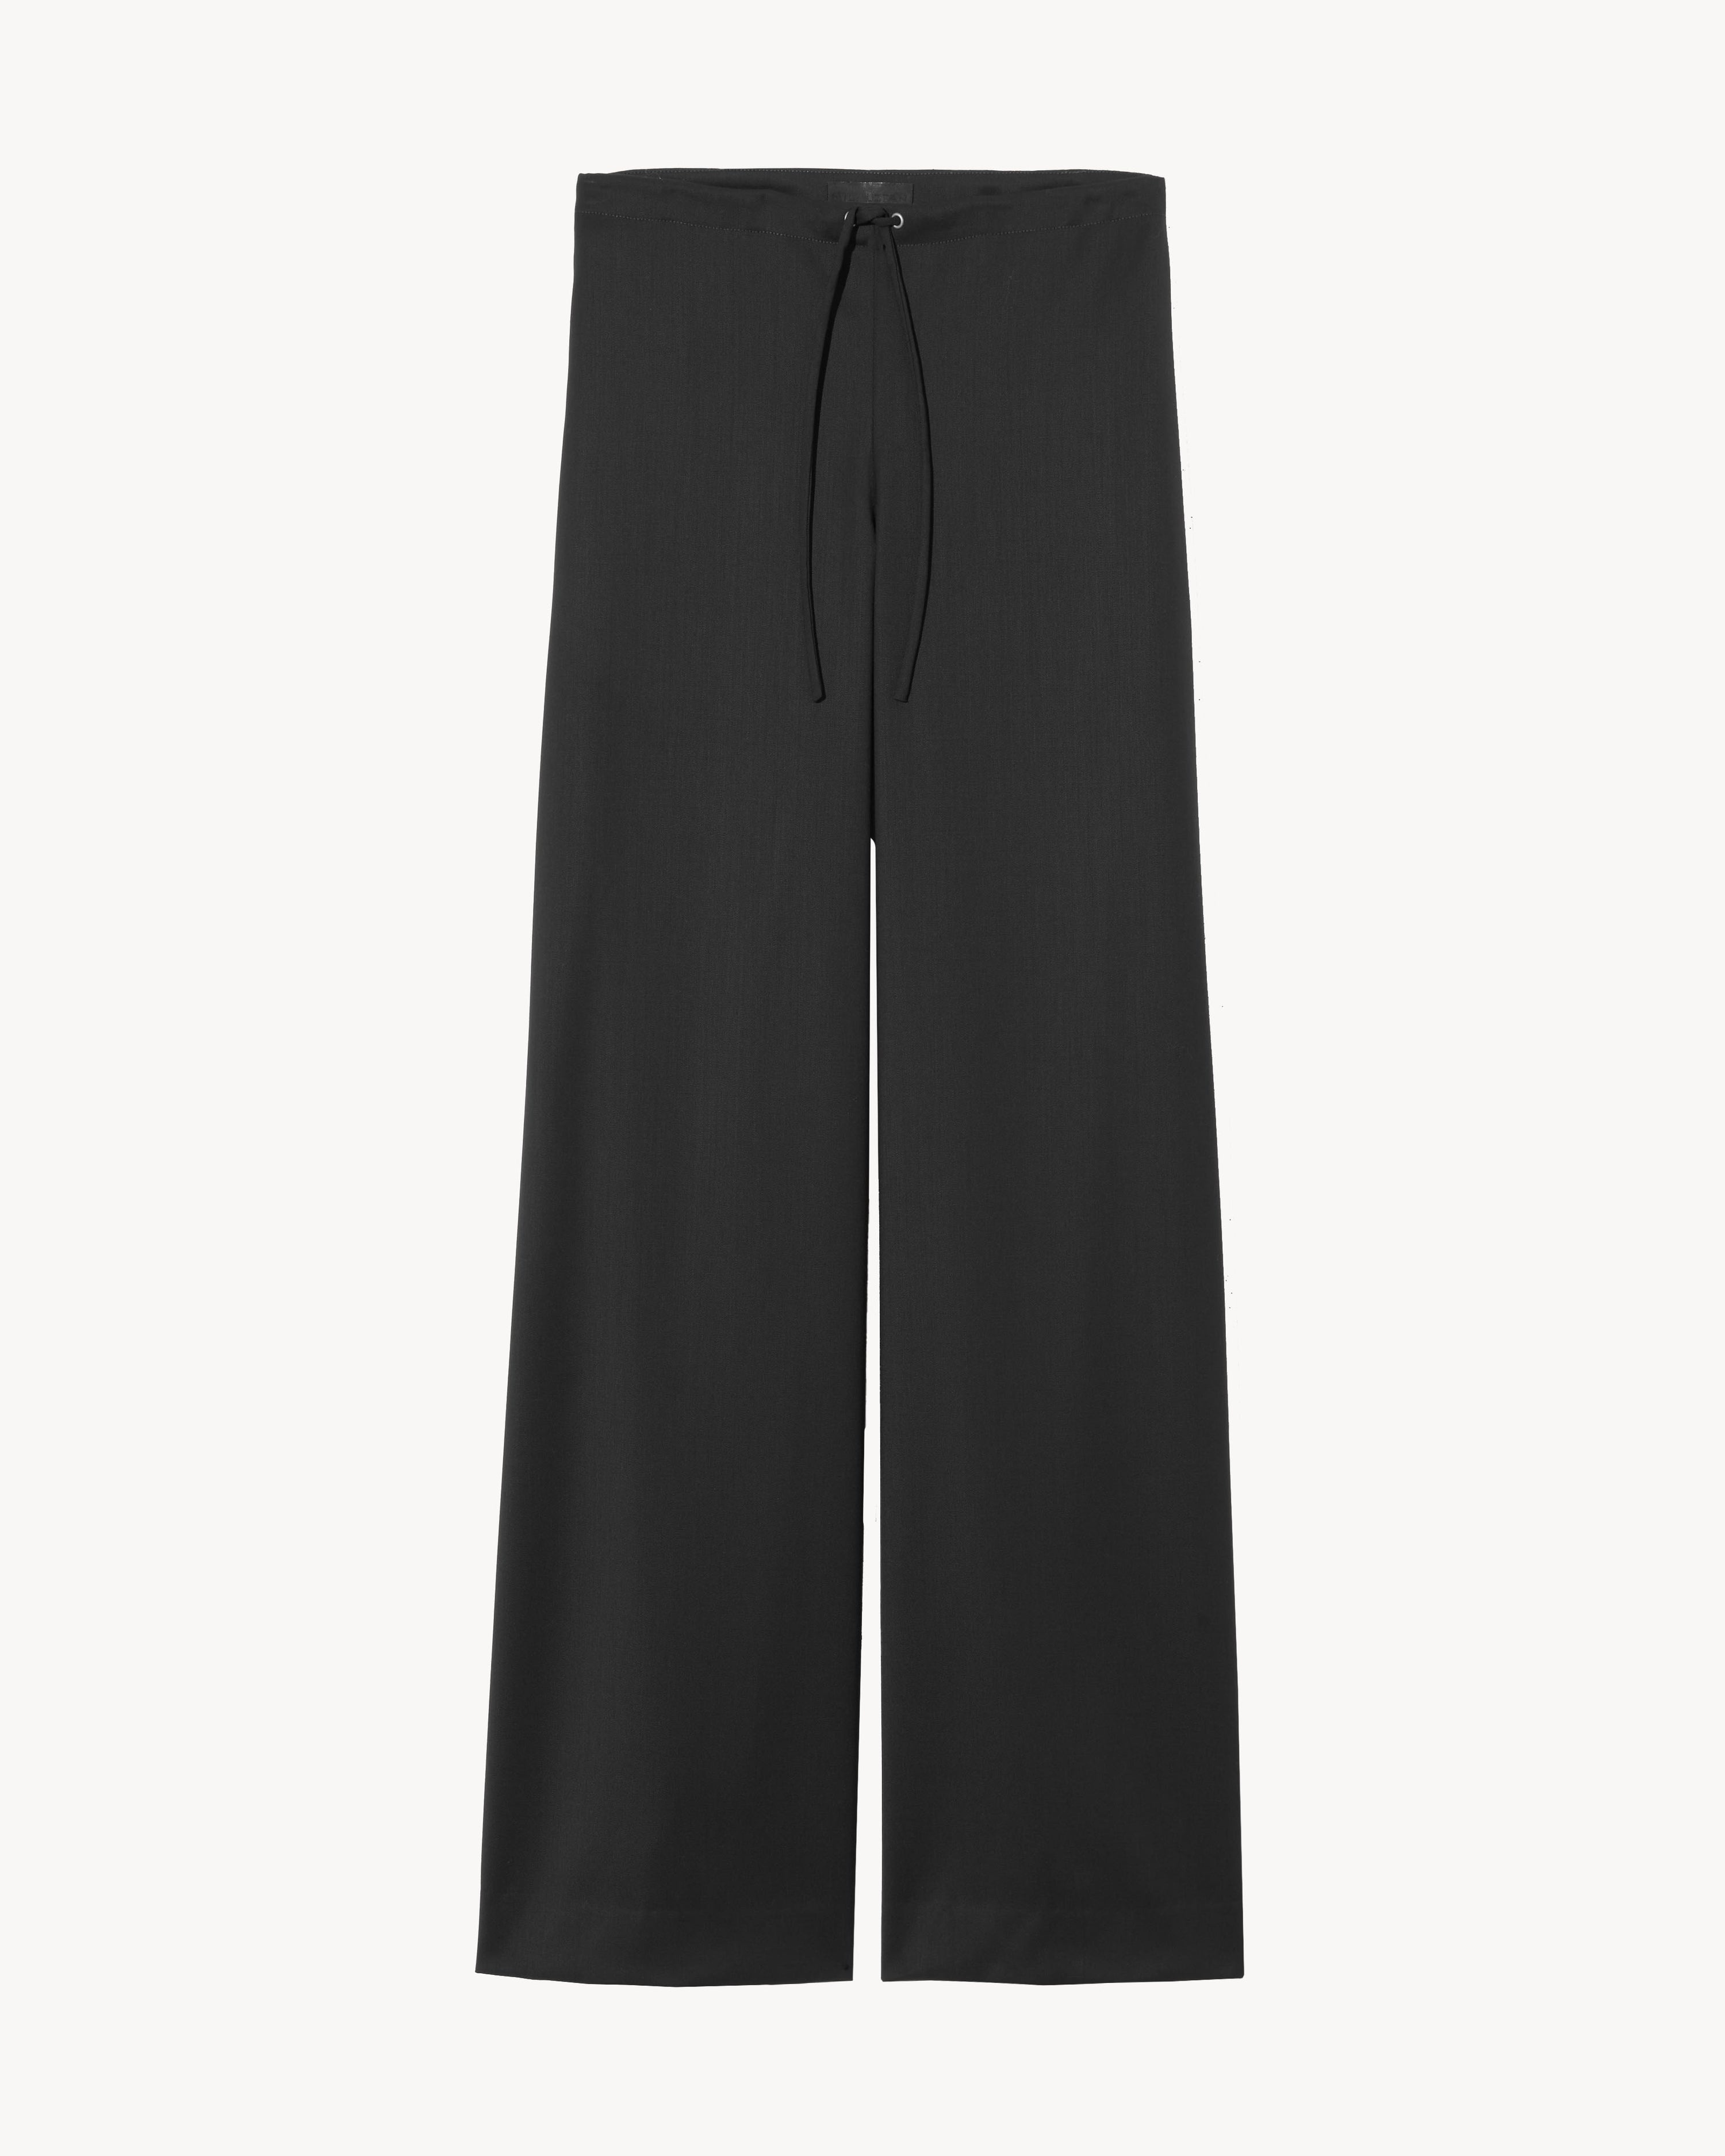 ADRIEL RELAX PANT - 1